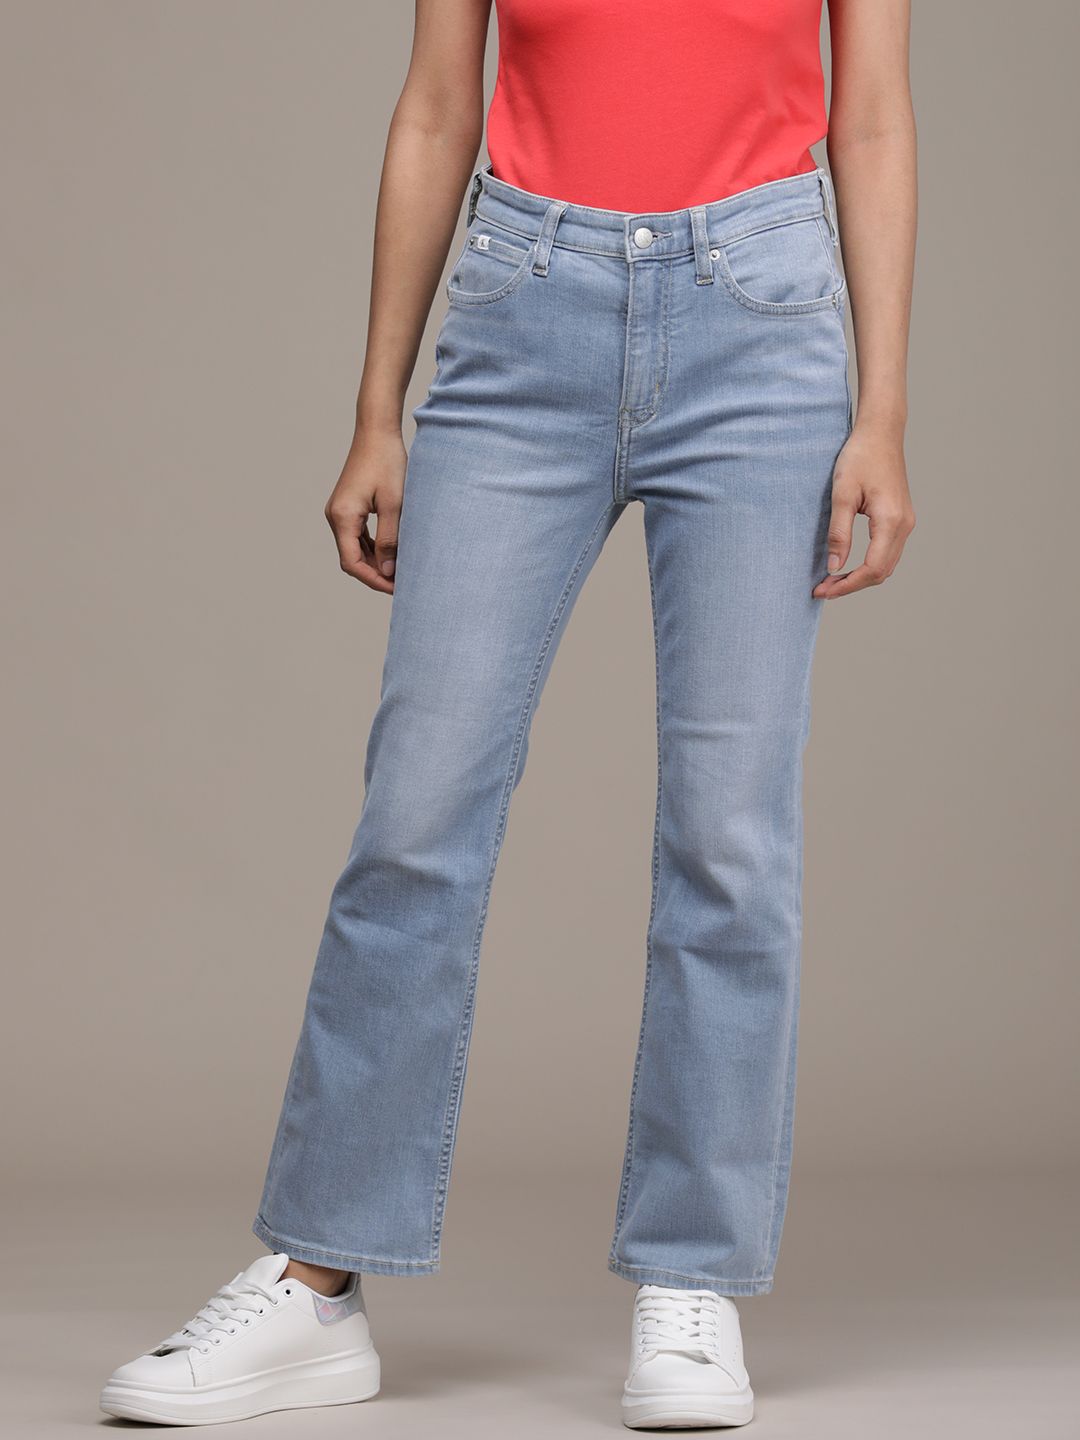 Calvin Klein Jeans Women Blue Bootcut High-Rise Light Fade Stretchable Jeans Price in India